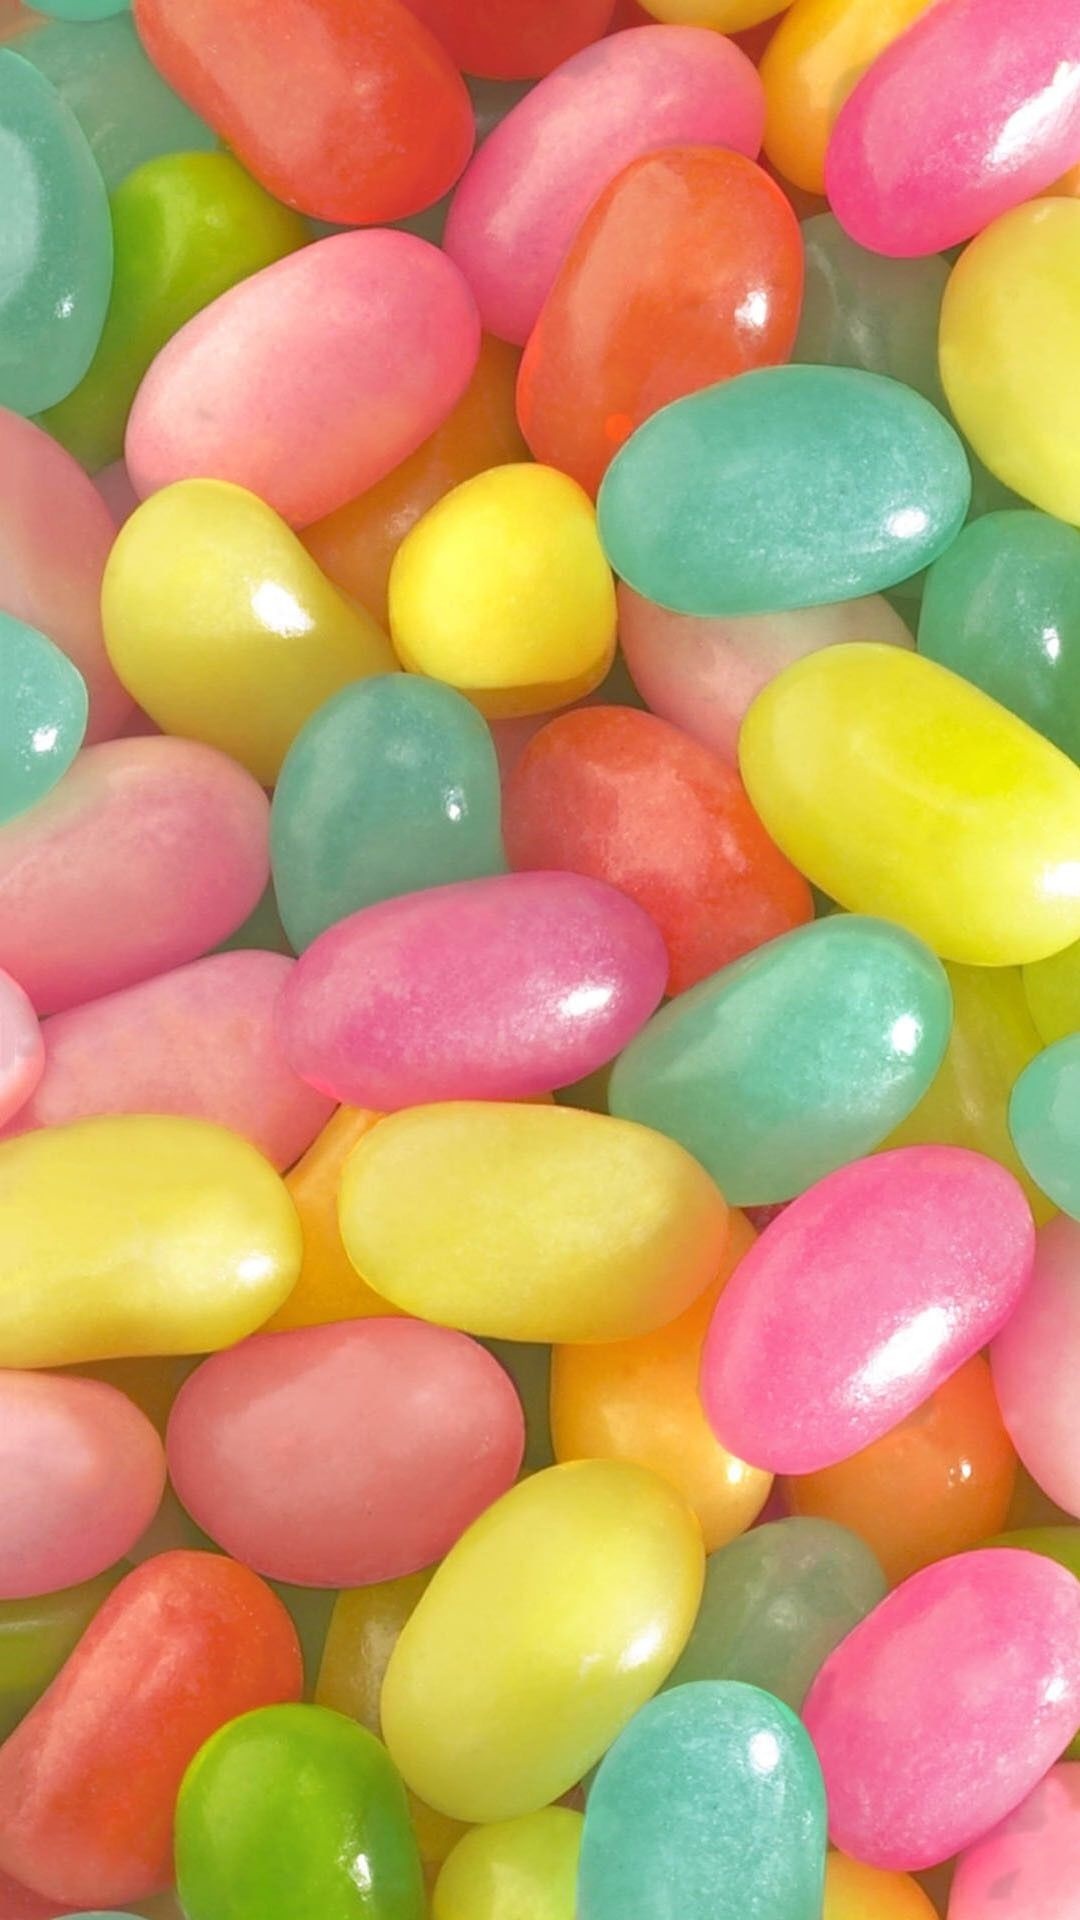 Easter-themed jelly beans, Festive candy, Colorful confection, Easter baking inspiration, 1080x1920 Full HD Phone